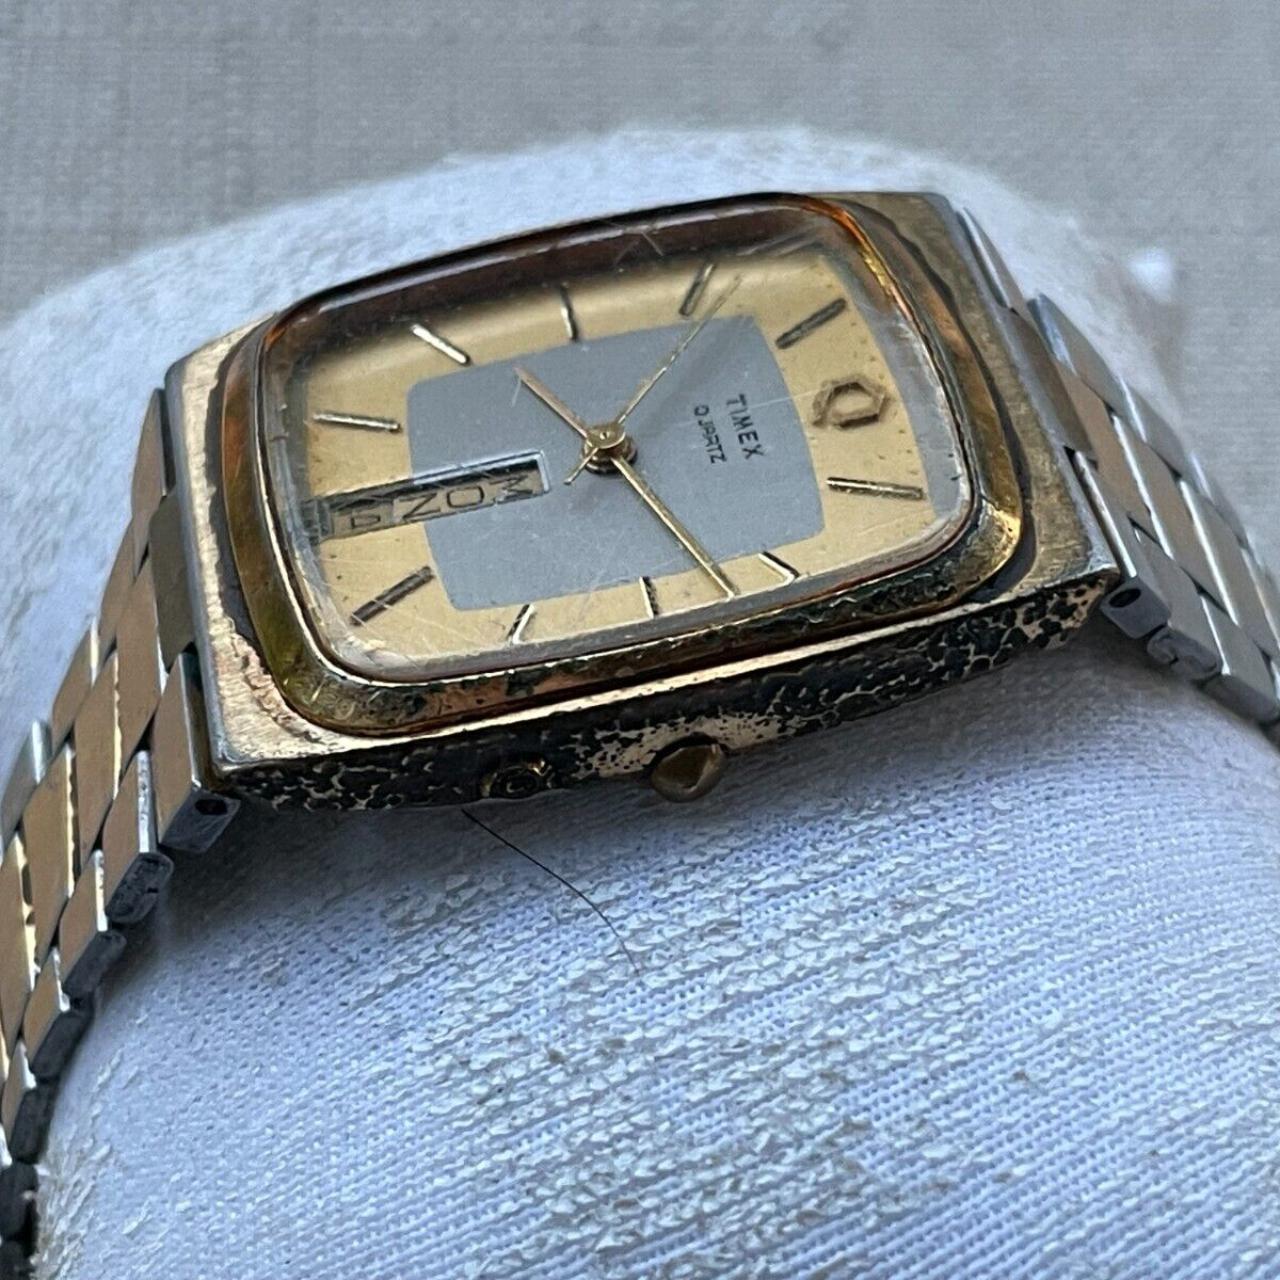 Identify] I got this Timex watch from my uncle more than 3 years ago and i  couldn't figure out which model it was as he just gifted it to me. Please  someone